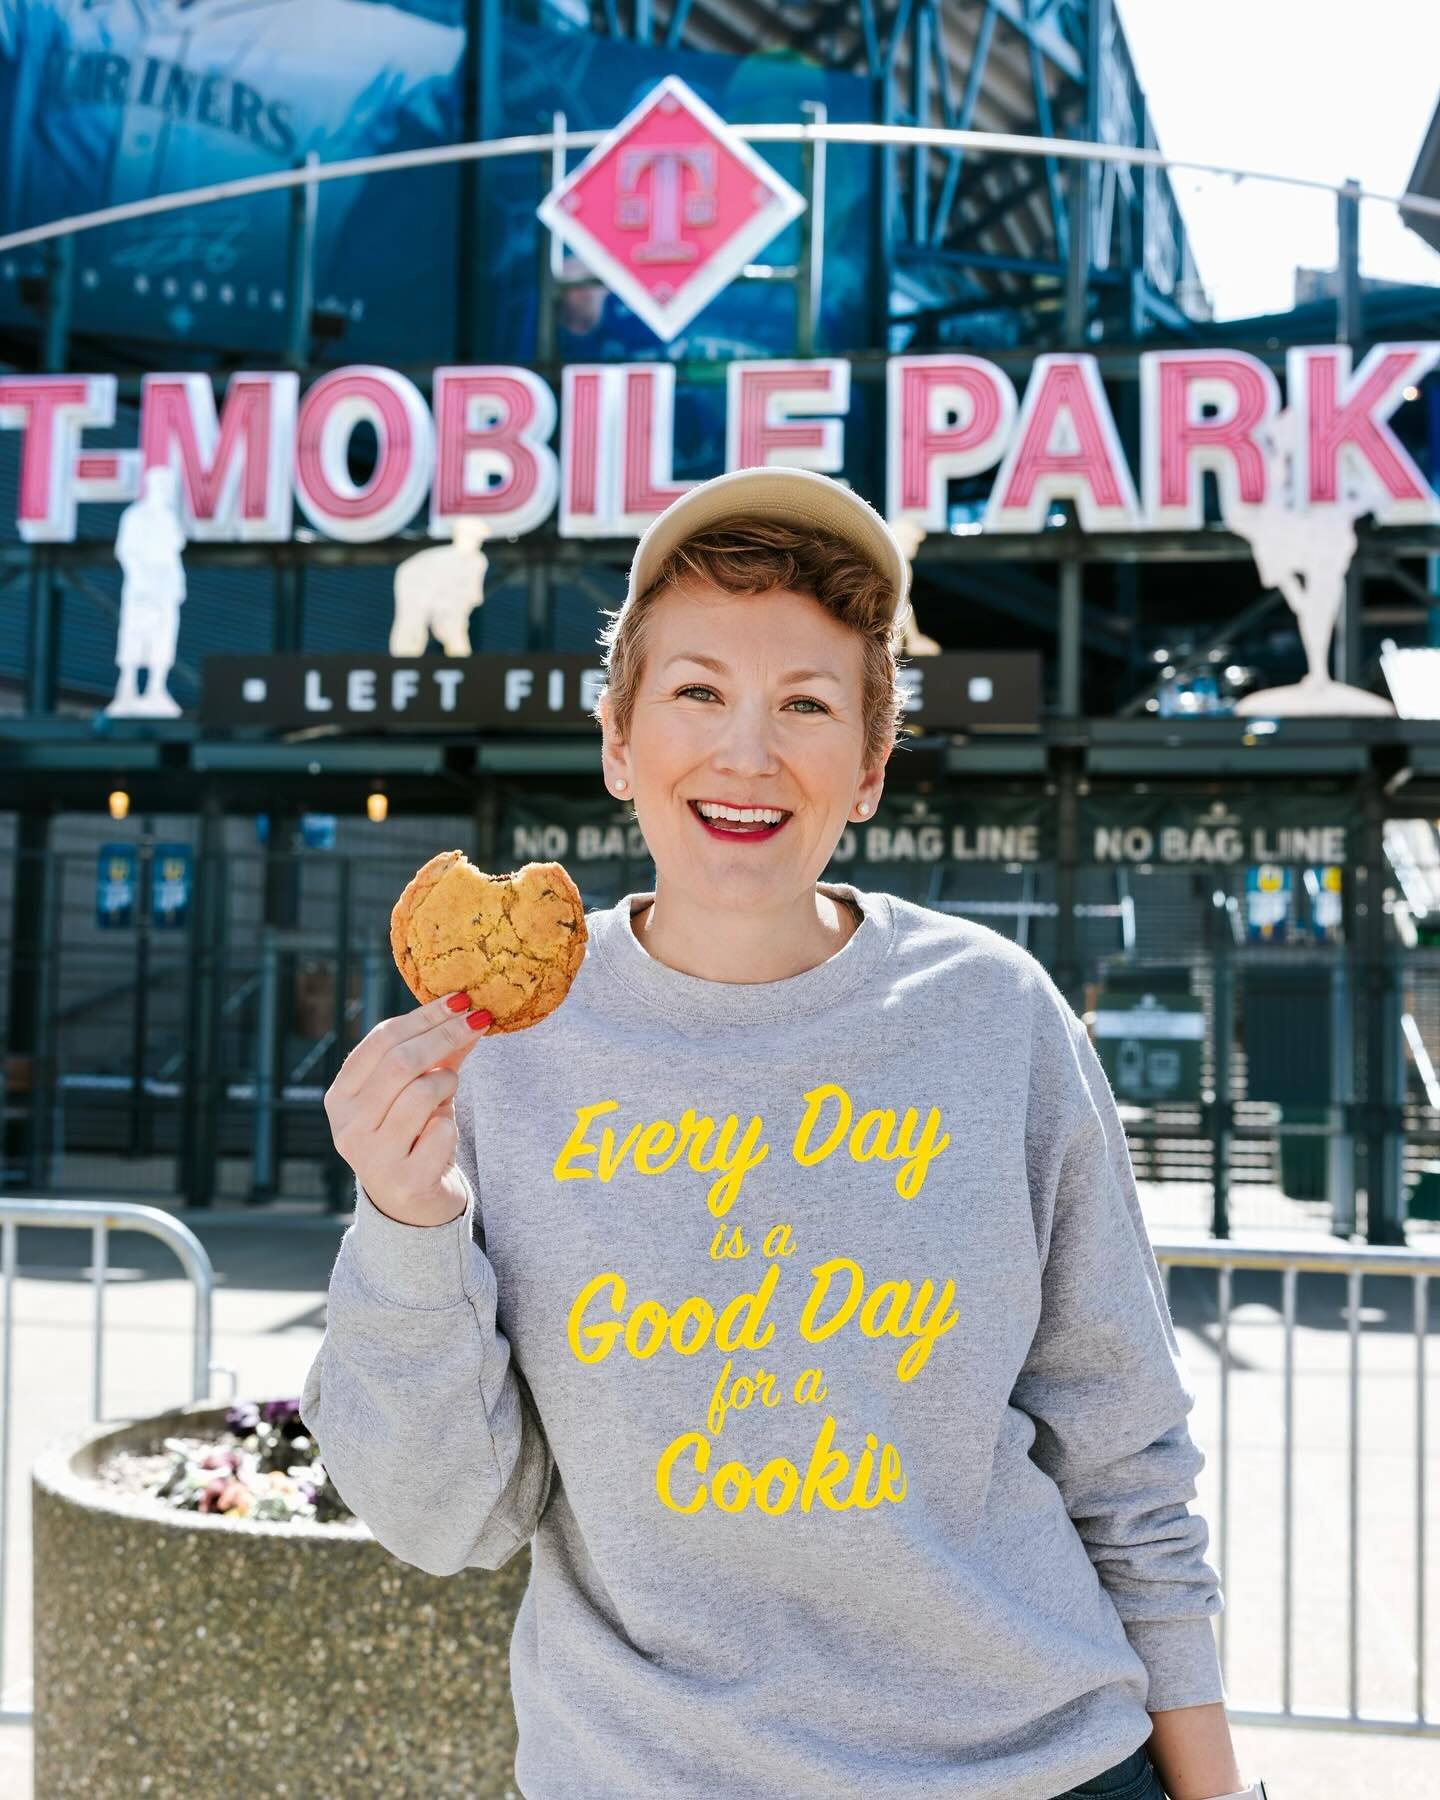 We&rsquo;re back @tmobilepark after a stadium wide sold-out Opening Day and packed weekend! Who&rsquo;s joining us for tonight&rsquo;s @mariners game?? Sunshine, baseball and freshly baked cookies, there&rsquo;s no better combo! 🍪⚾️☀️

We just dropp